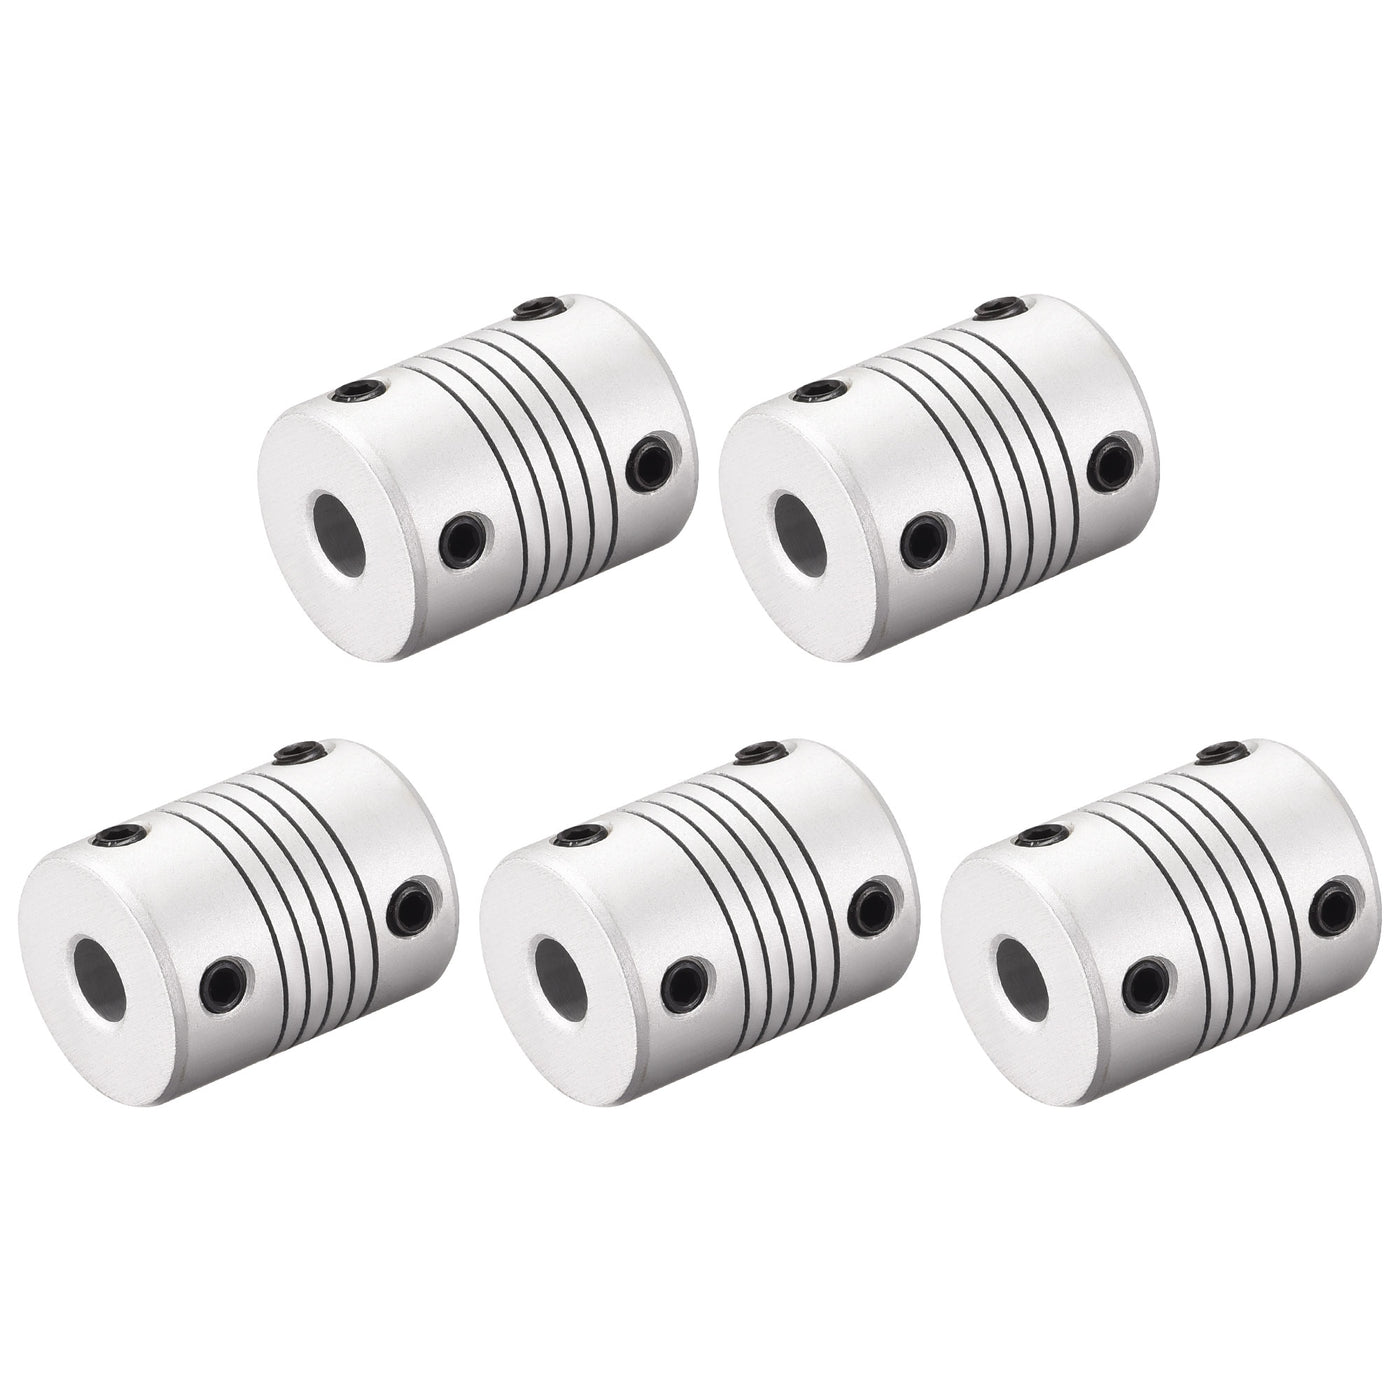 uxcell Uxcell 8mm to 9mm Aluminum Alloy Shaft Coupling Flexible Coupler L25xD19 Silver,5pcs